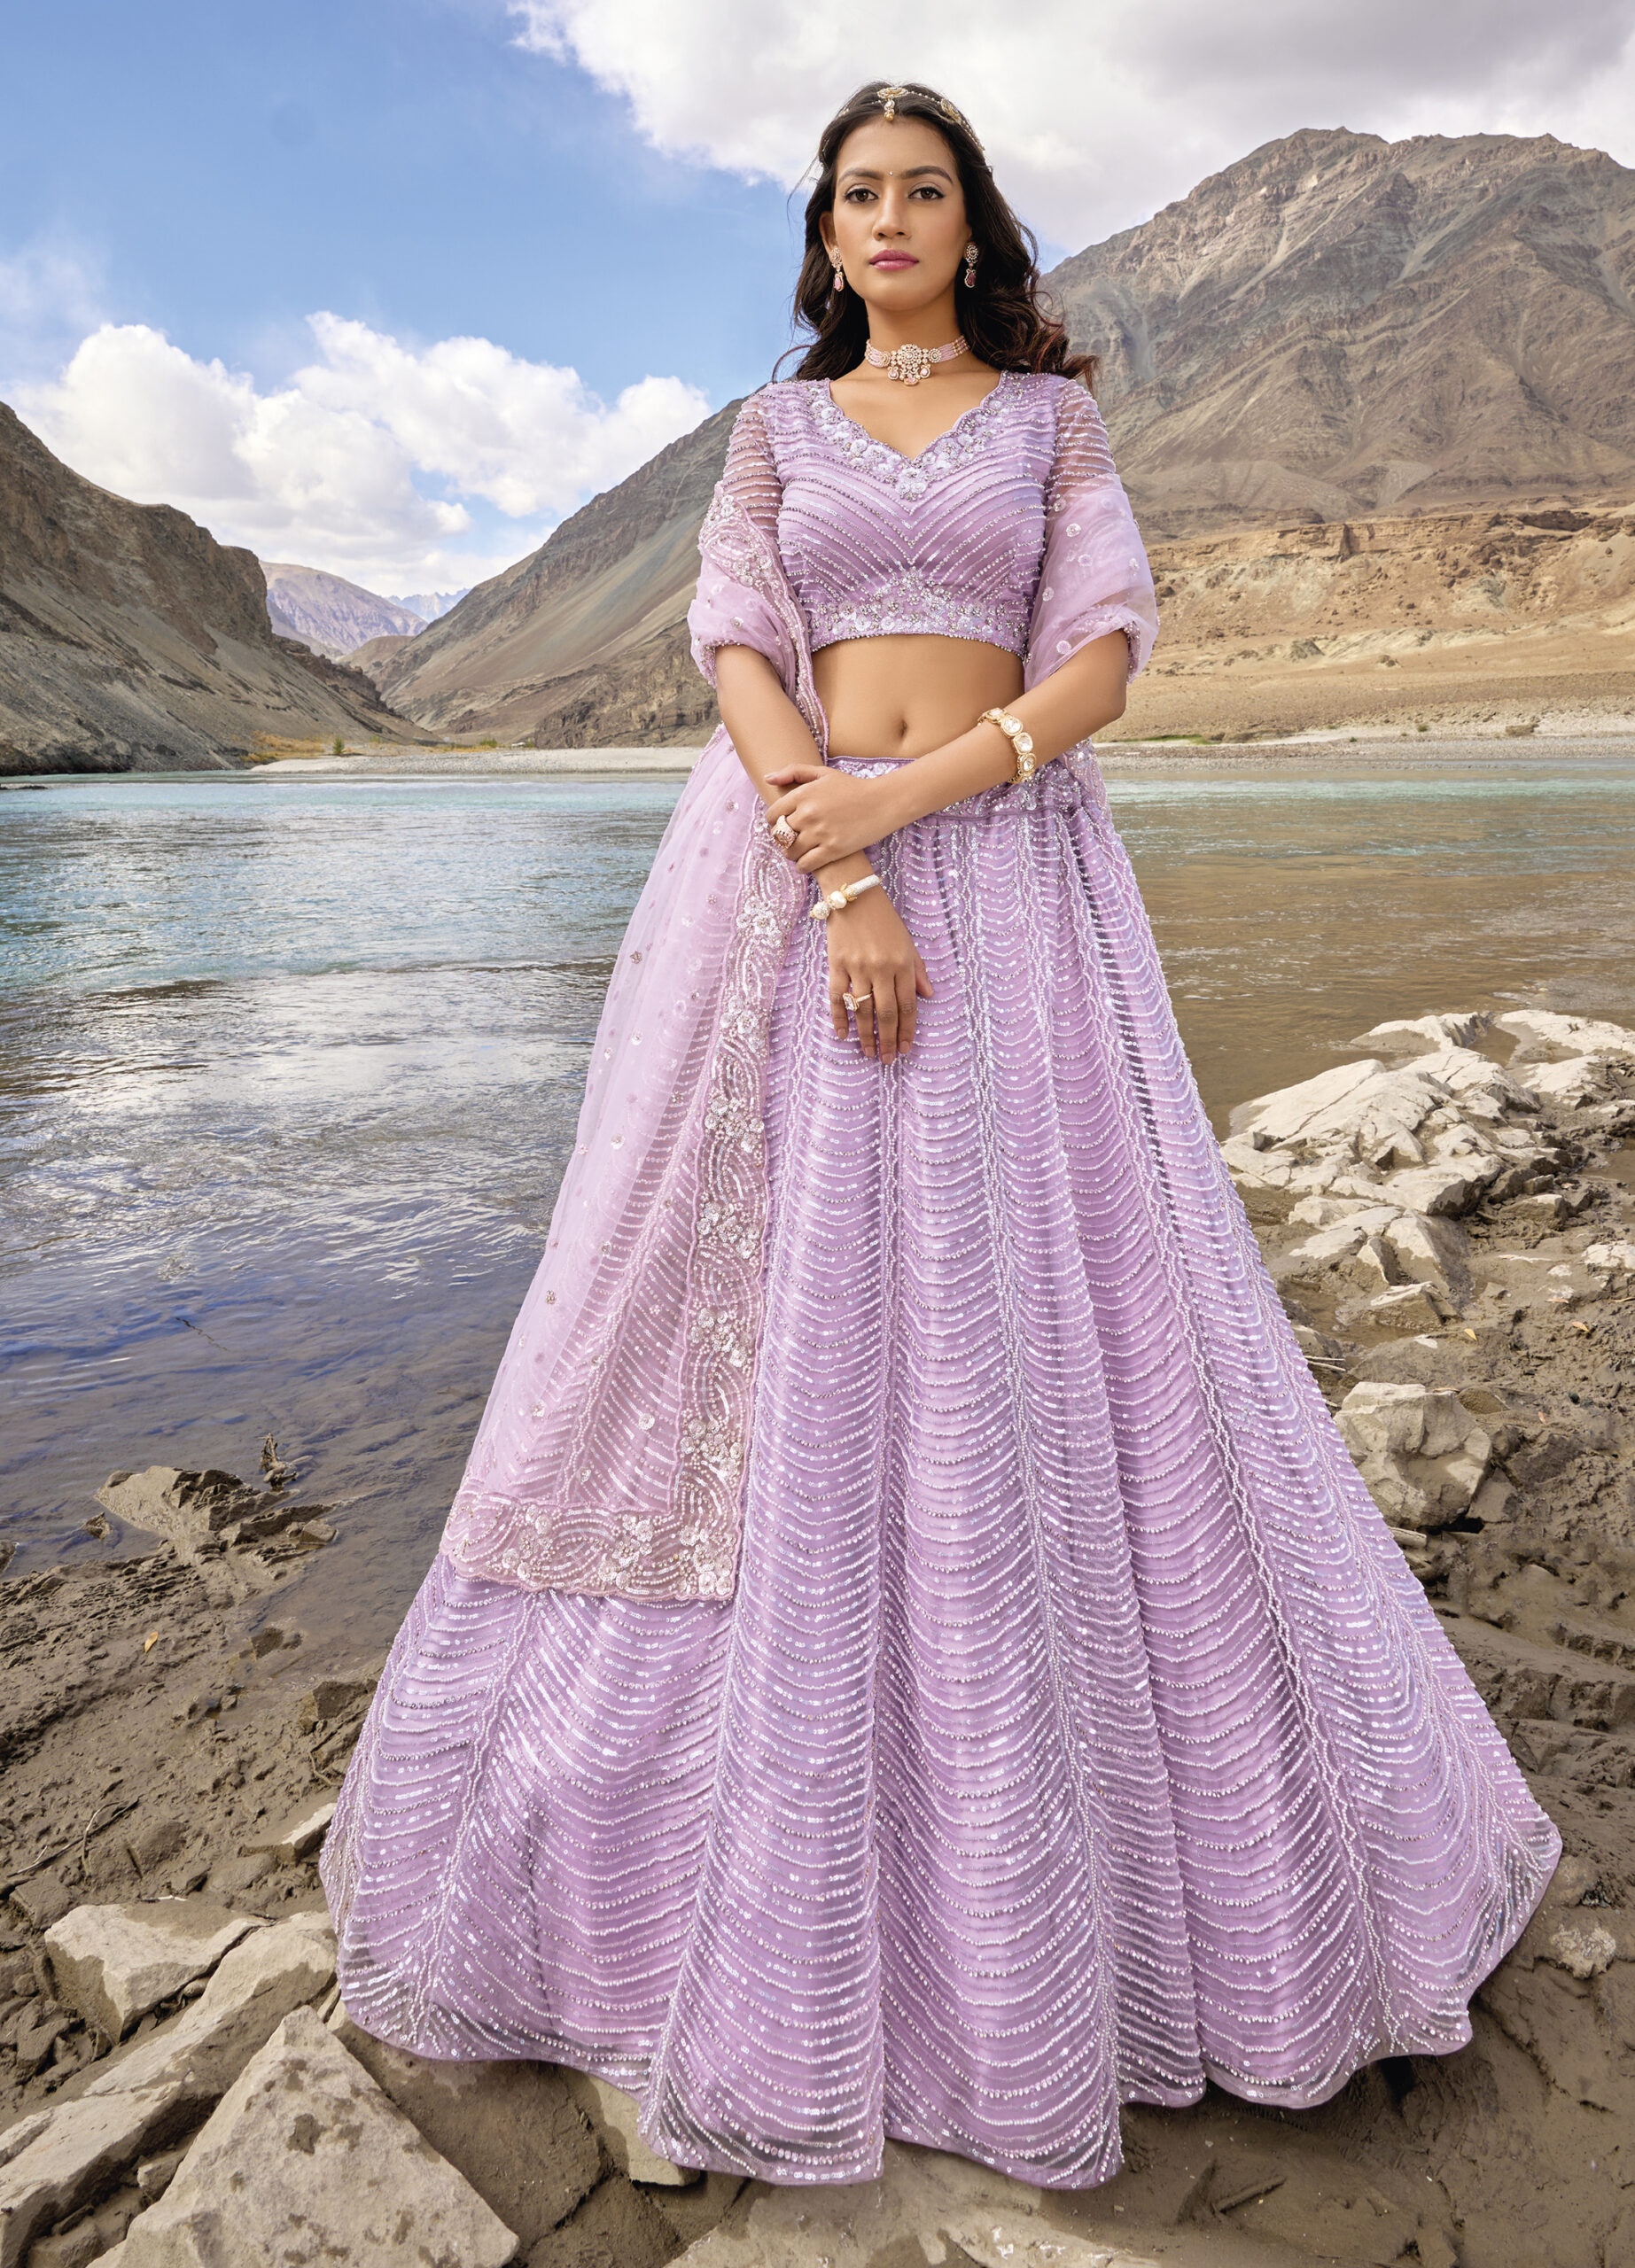 These Latest Lavender Lehengas for 2021 Real Brides Are Immaculate! | Lehenga  color combinations, Wedding matching outfits, Indian wedding outfits